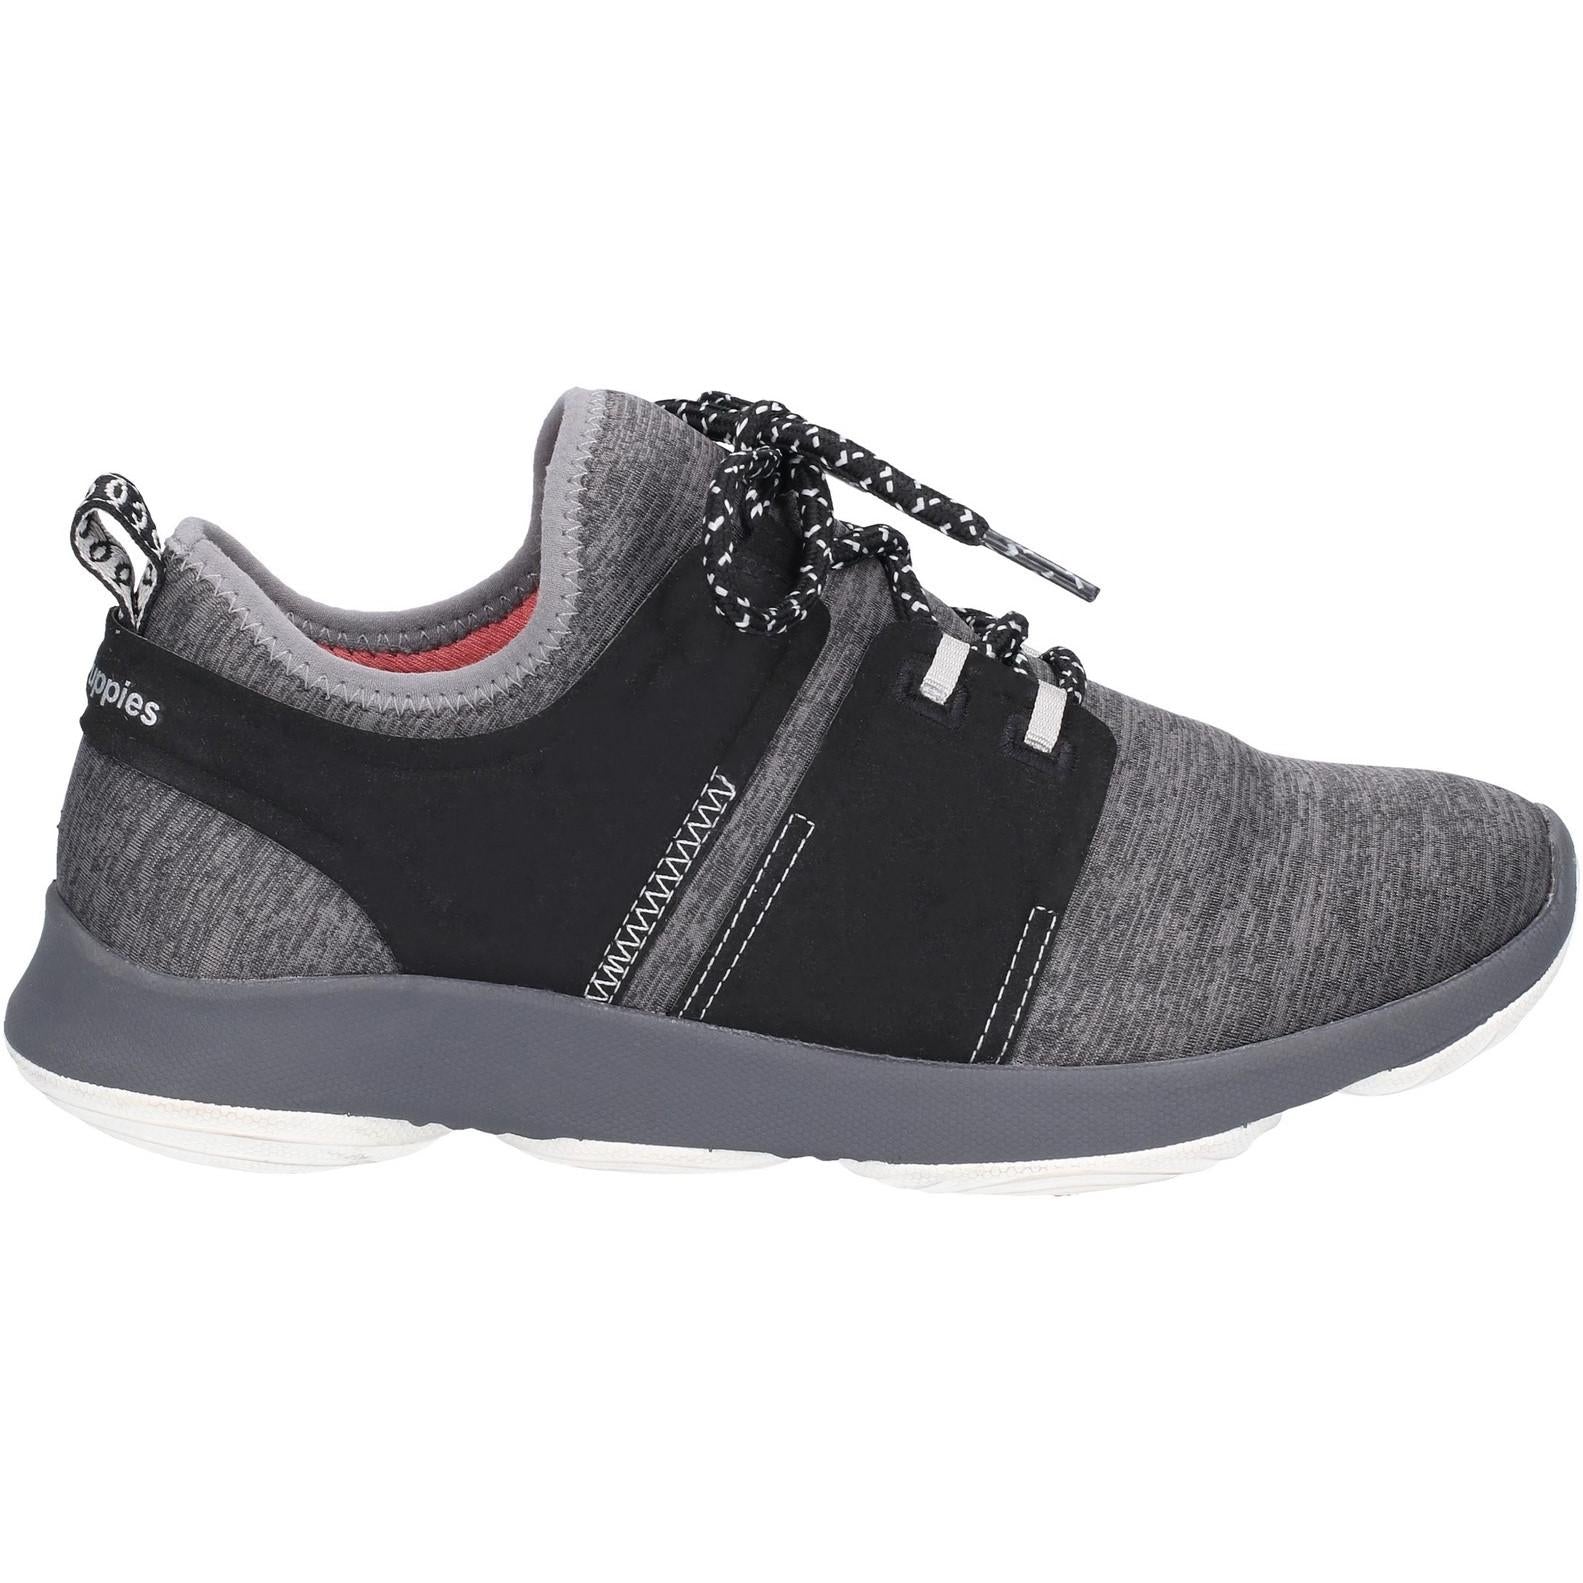 Hush Puppies Geo BounceMax Lace Up Trainer